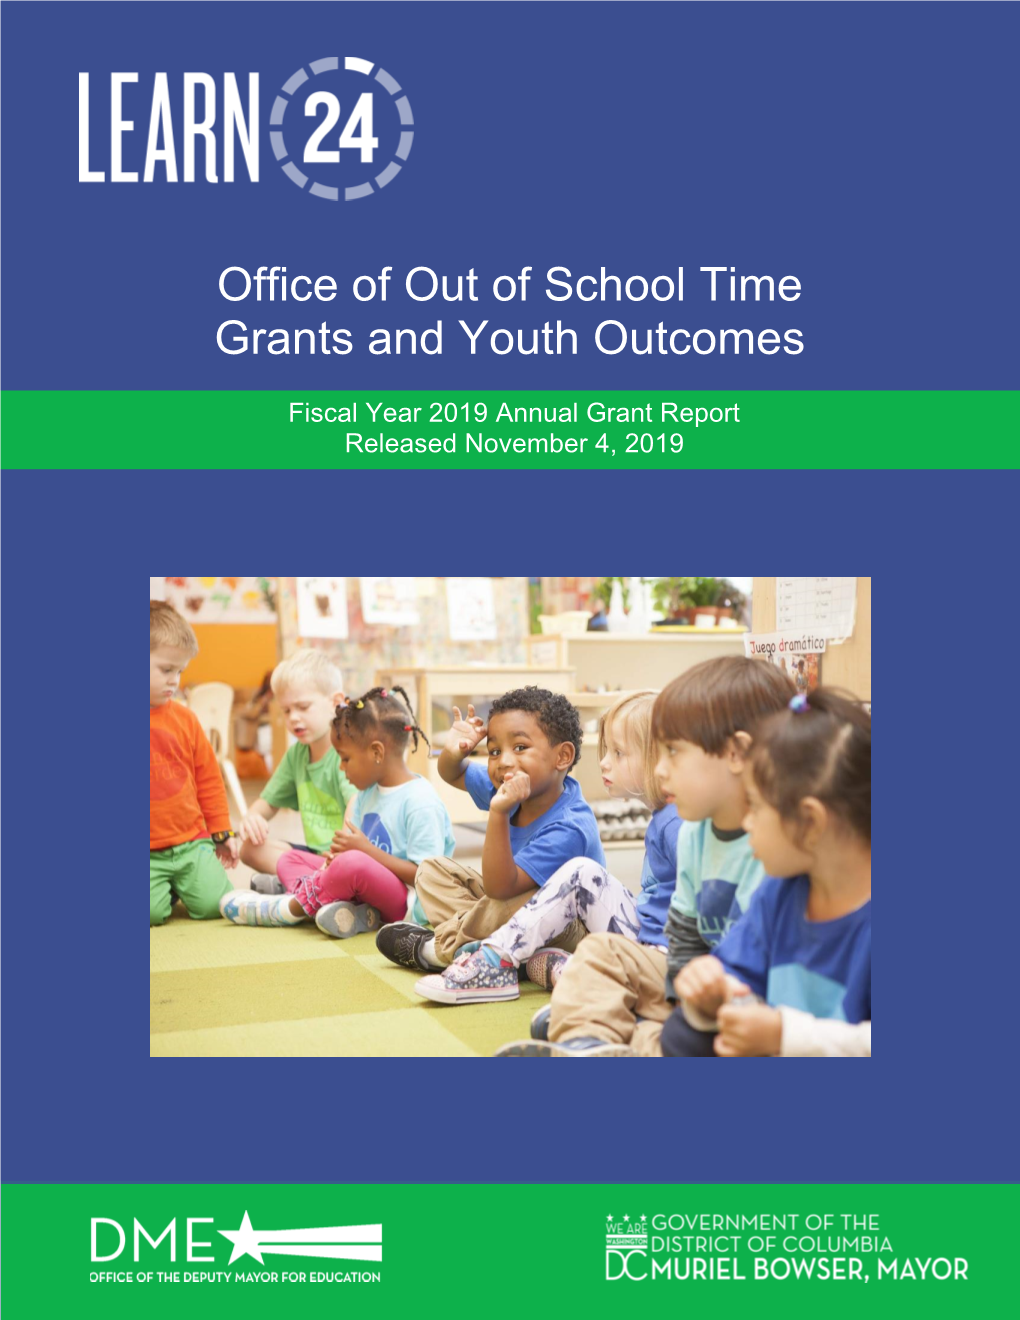 Office of out of School Time Grants and Youth Outcomes